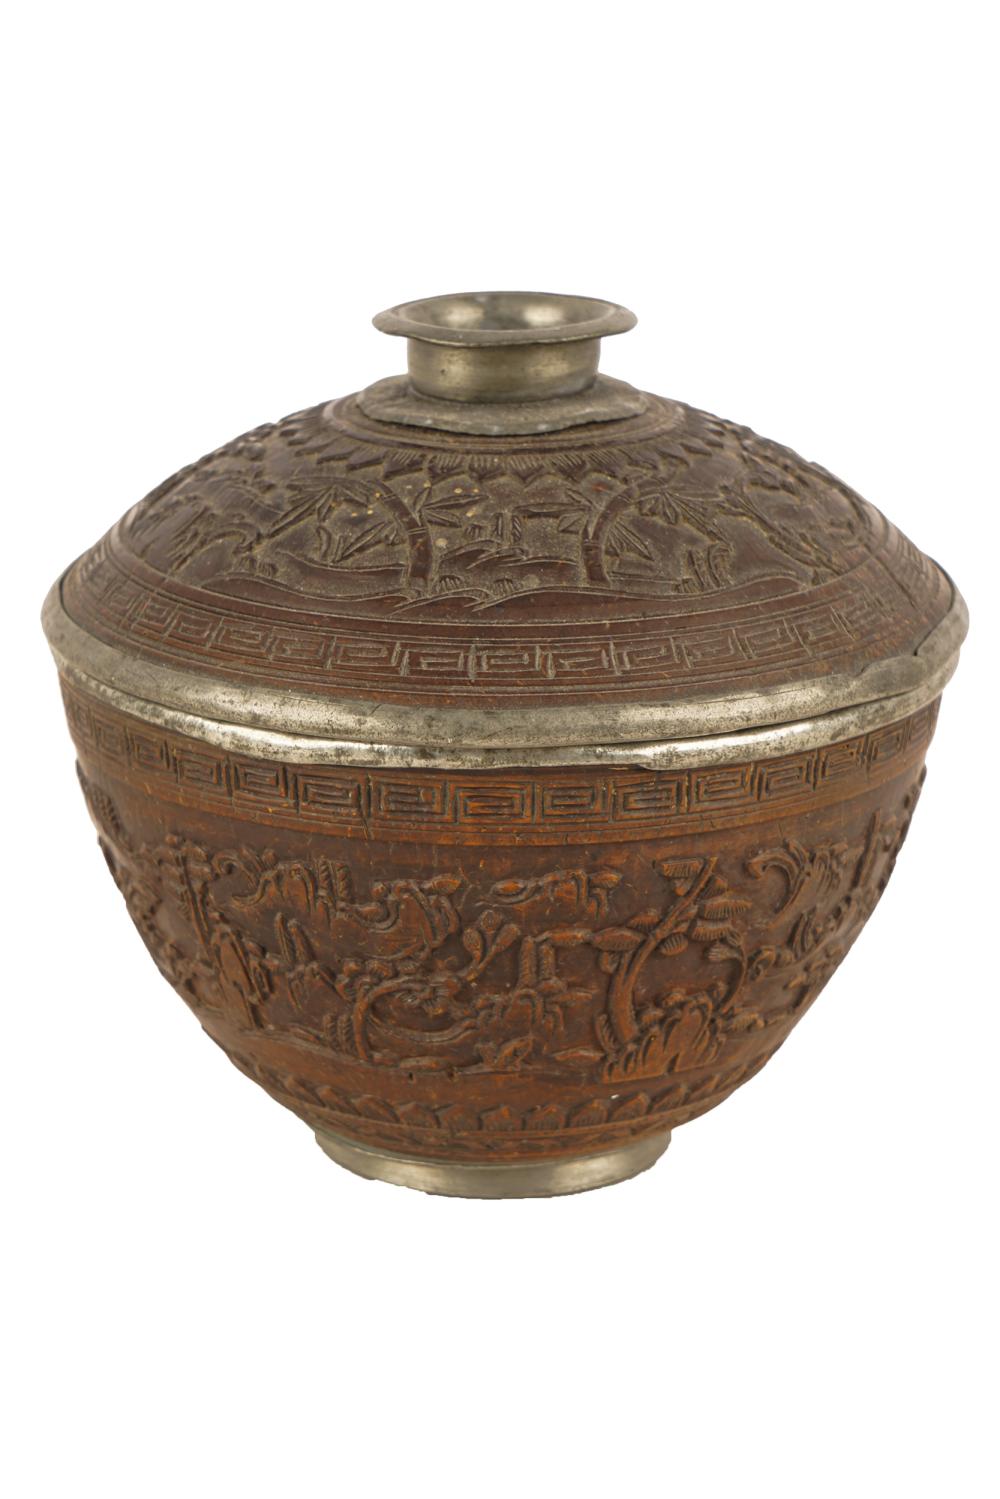 CHINESE CARVED COCONUT COVERED 33252c